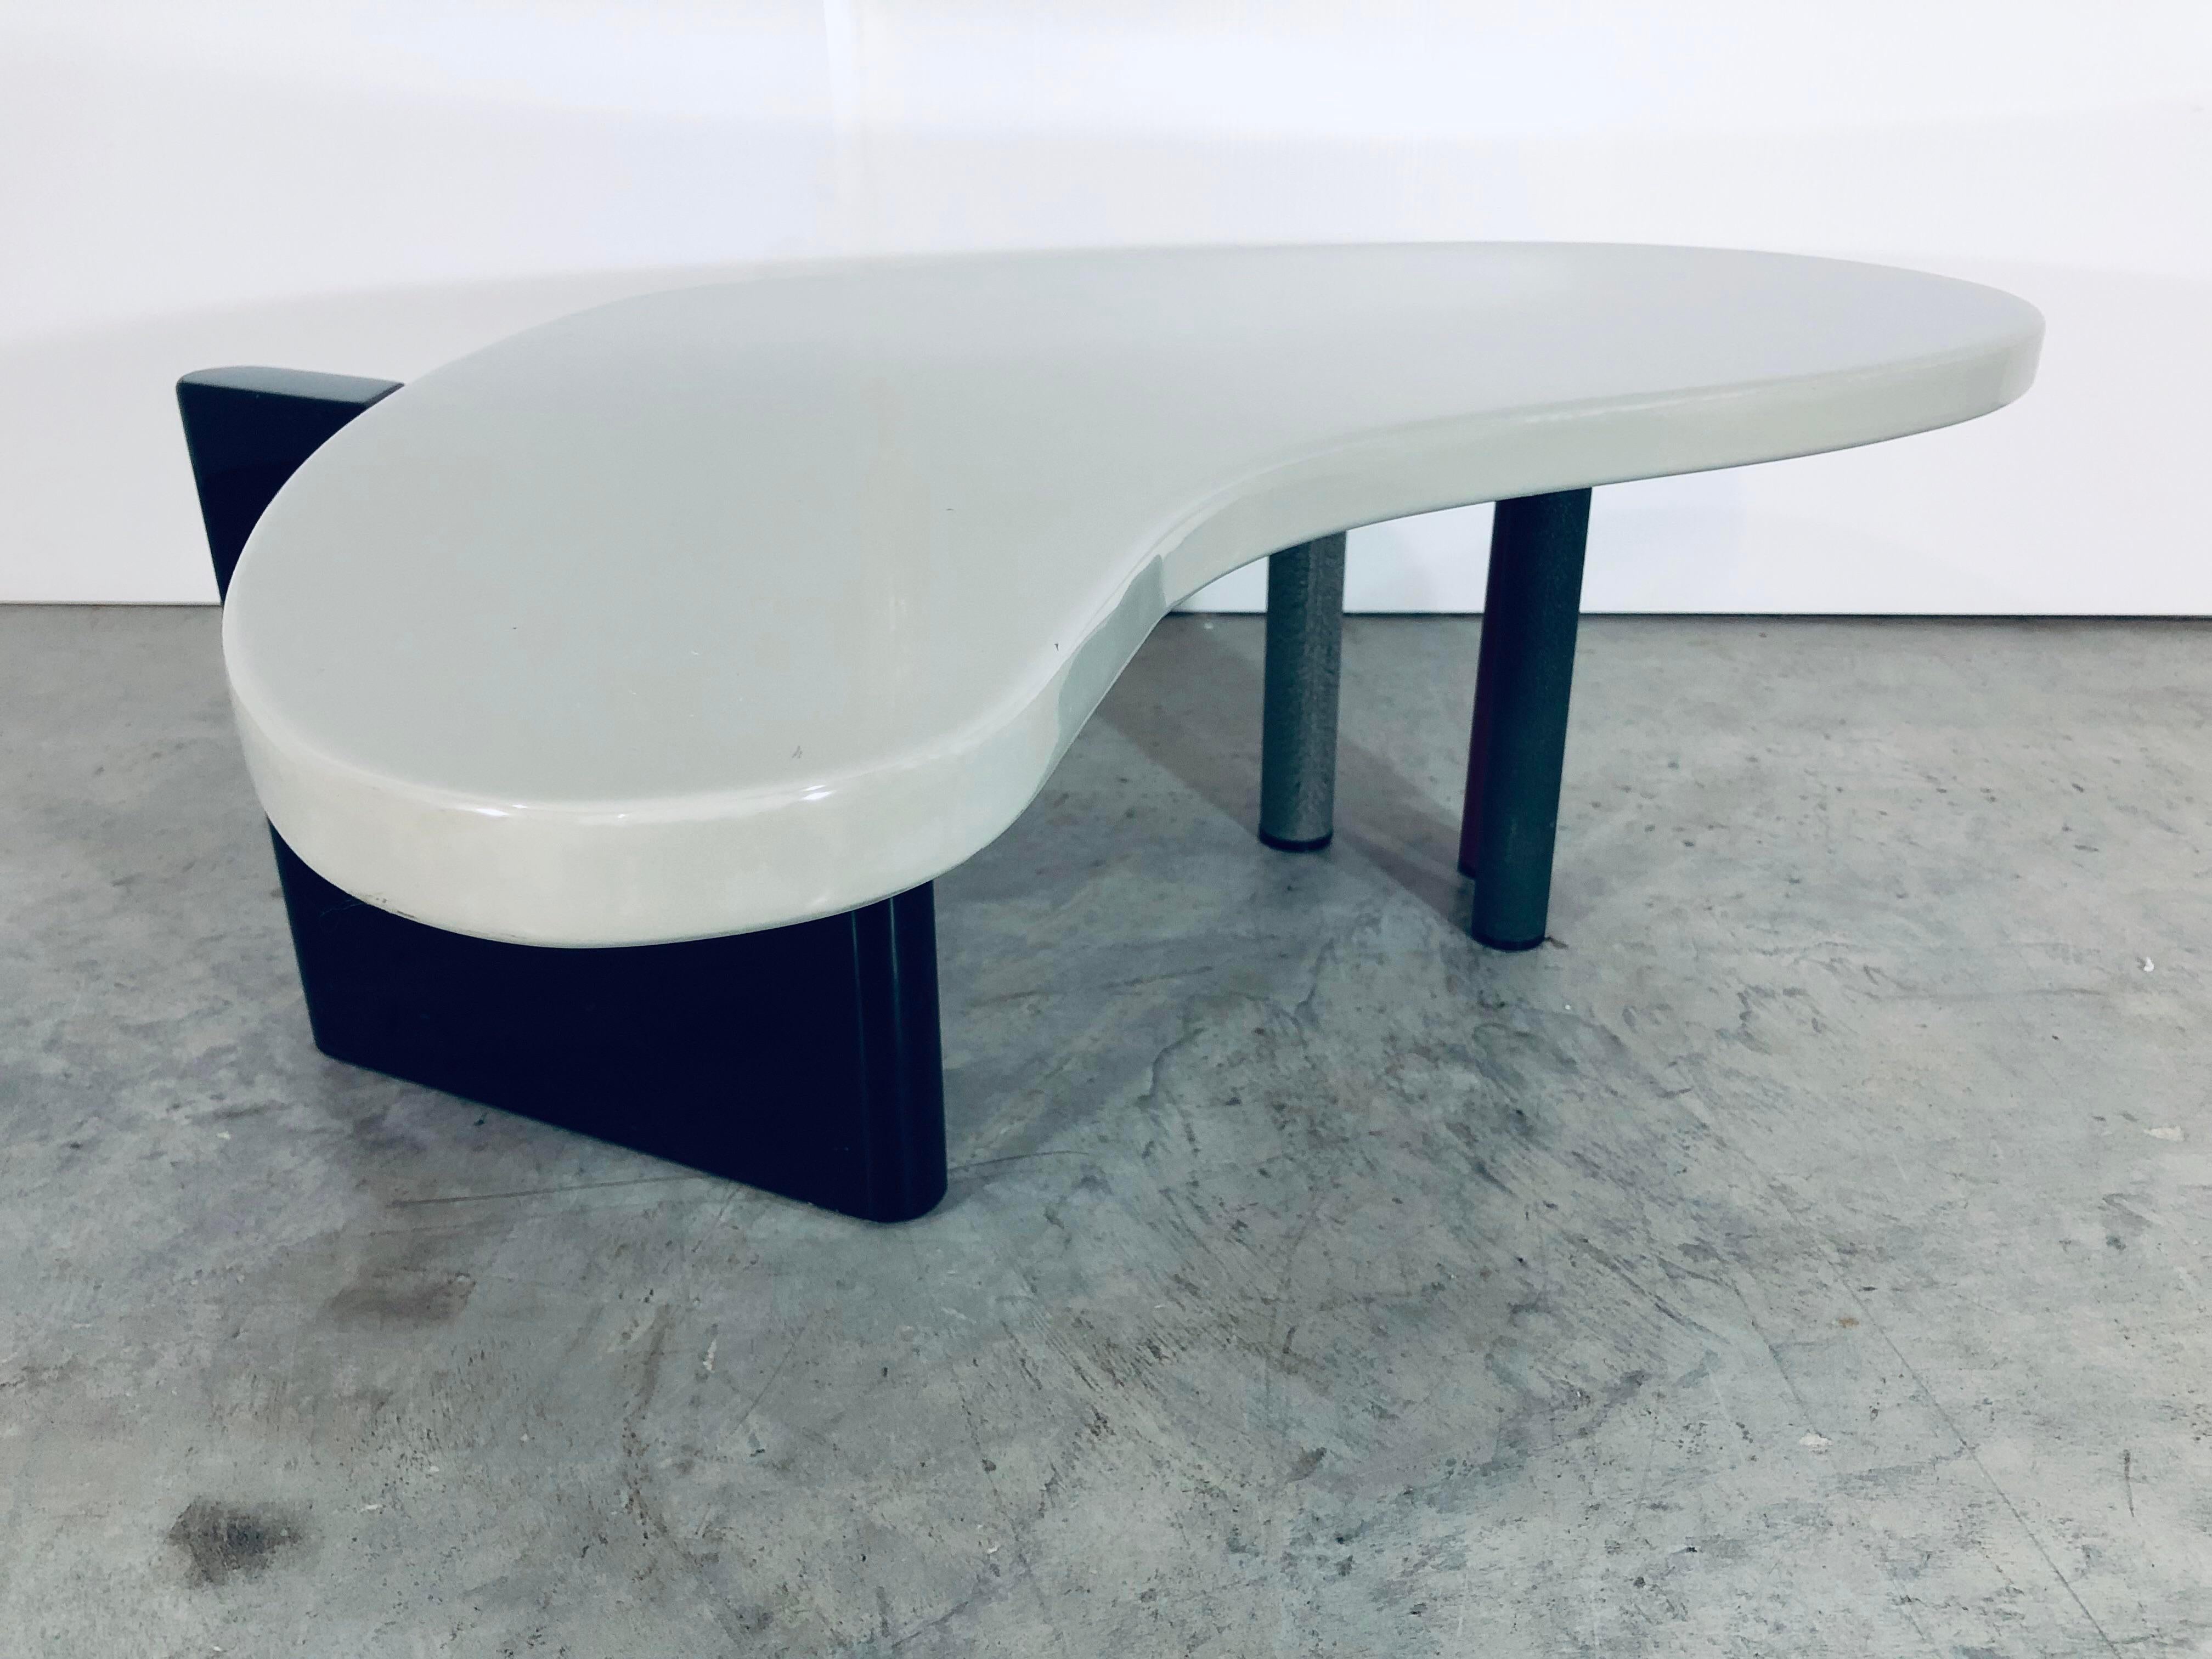 Postmodern Memphis lacquered coffee or side table by Maurizio Salvato for Saporiti. Made in the 1980s.